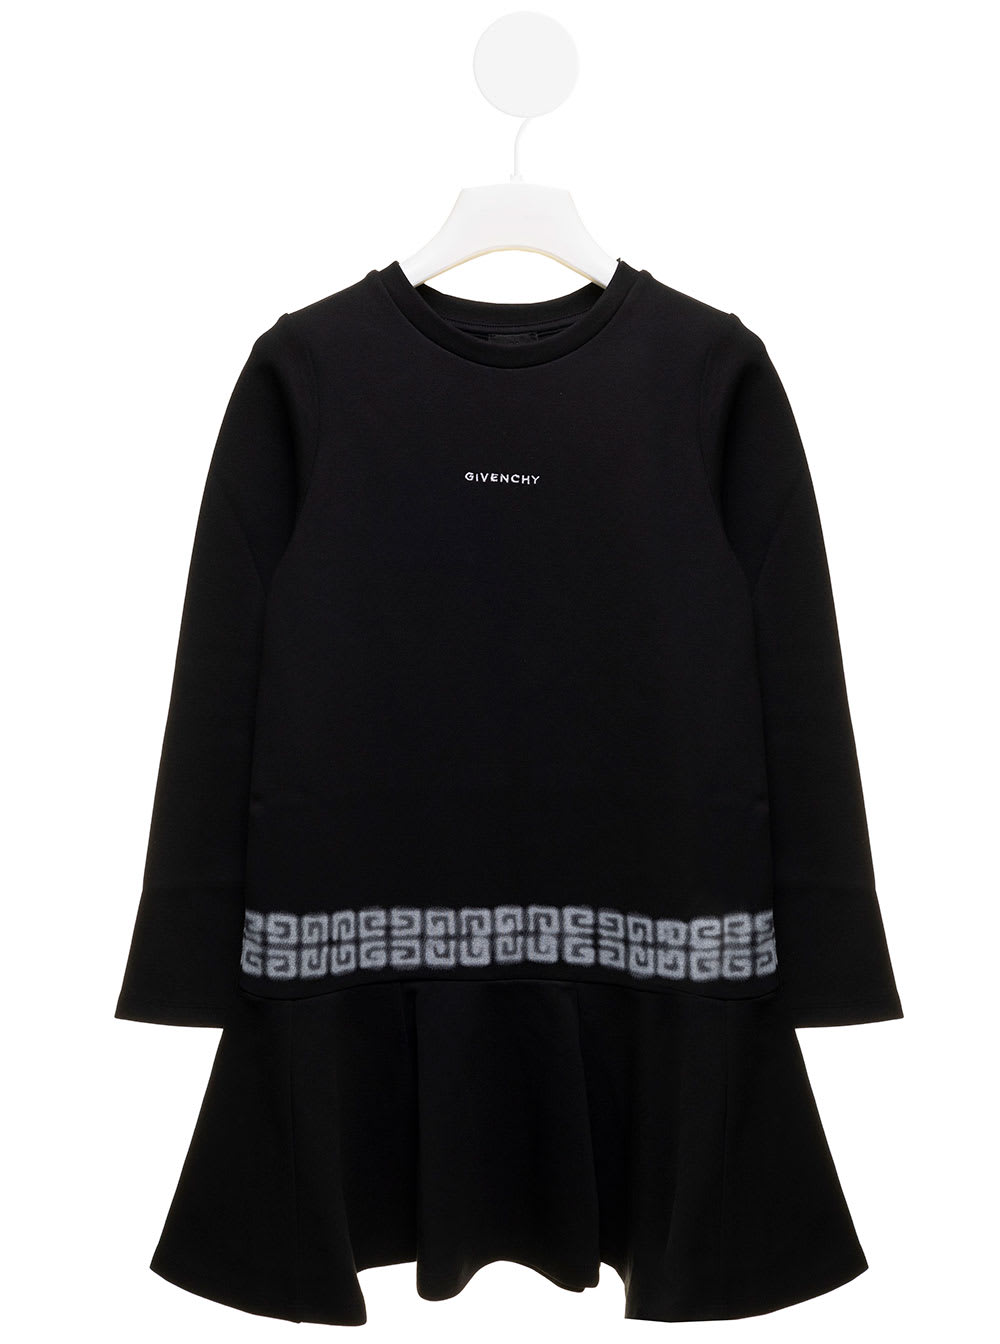 GIVENCHY COTTON JERSEY DRESS WITH LOGO AND 4G PRINT KIDS GIRL